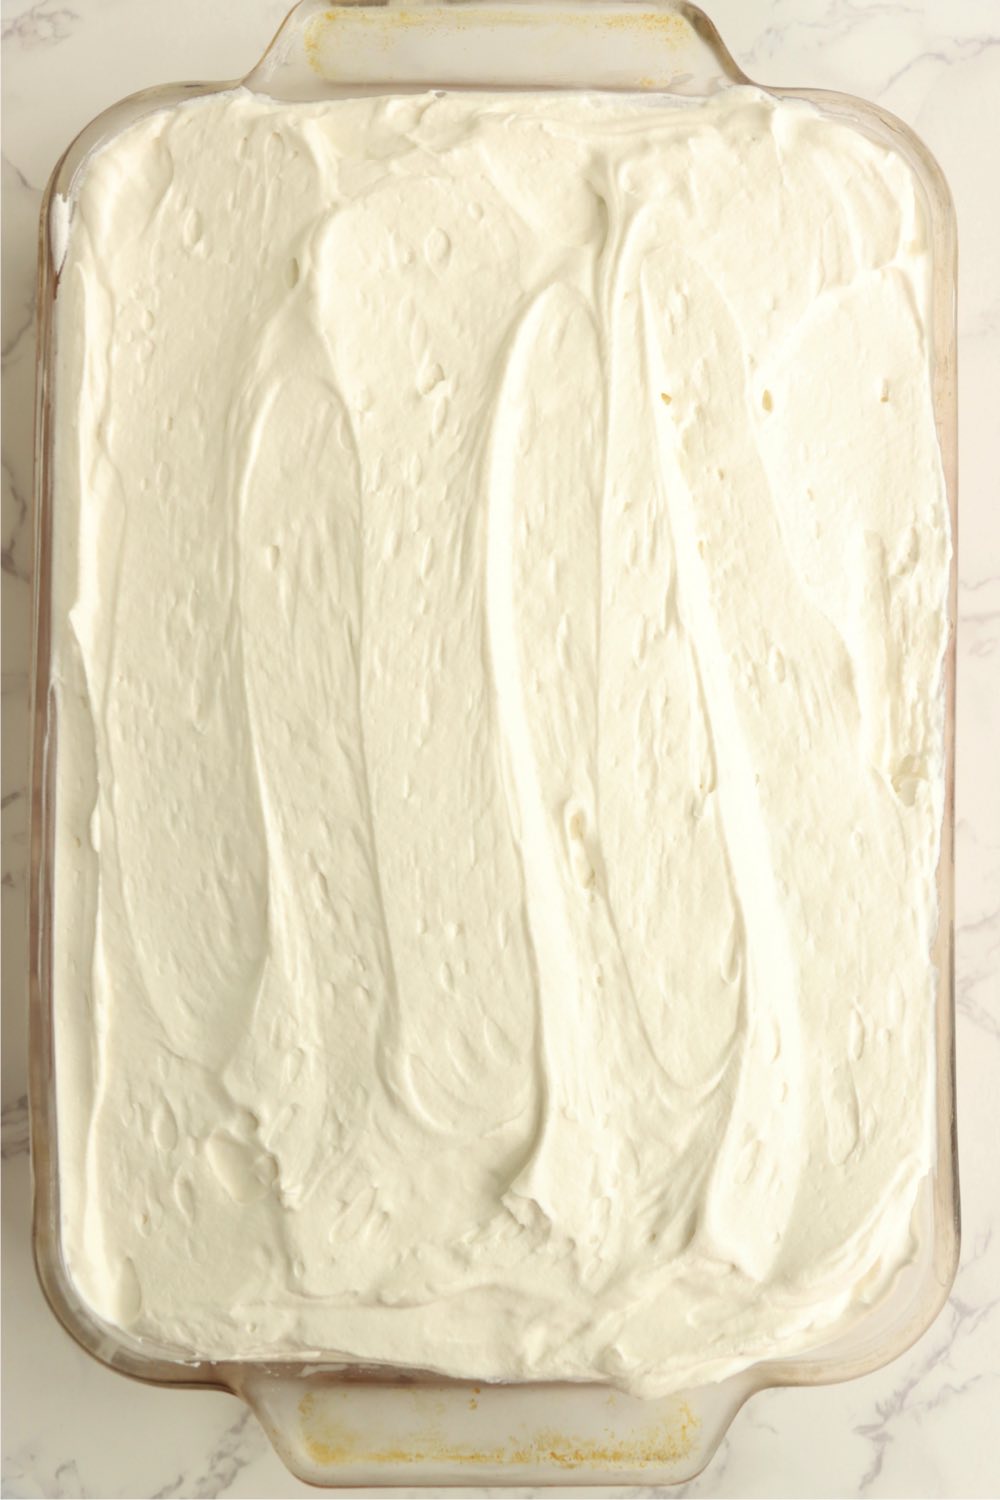 A tres leches cake covered with whipped topping